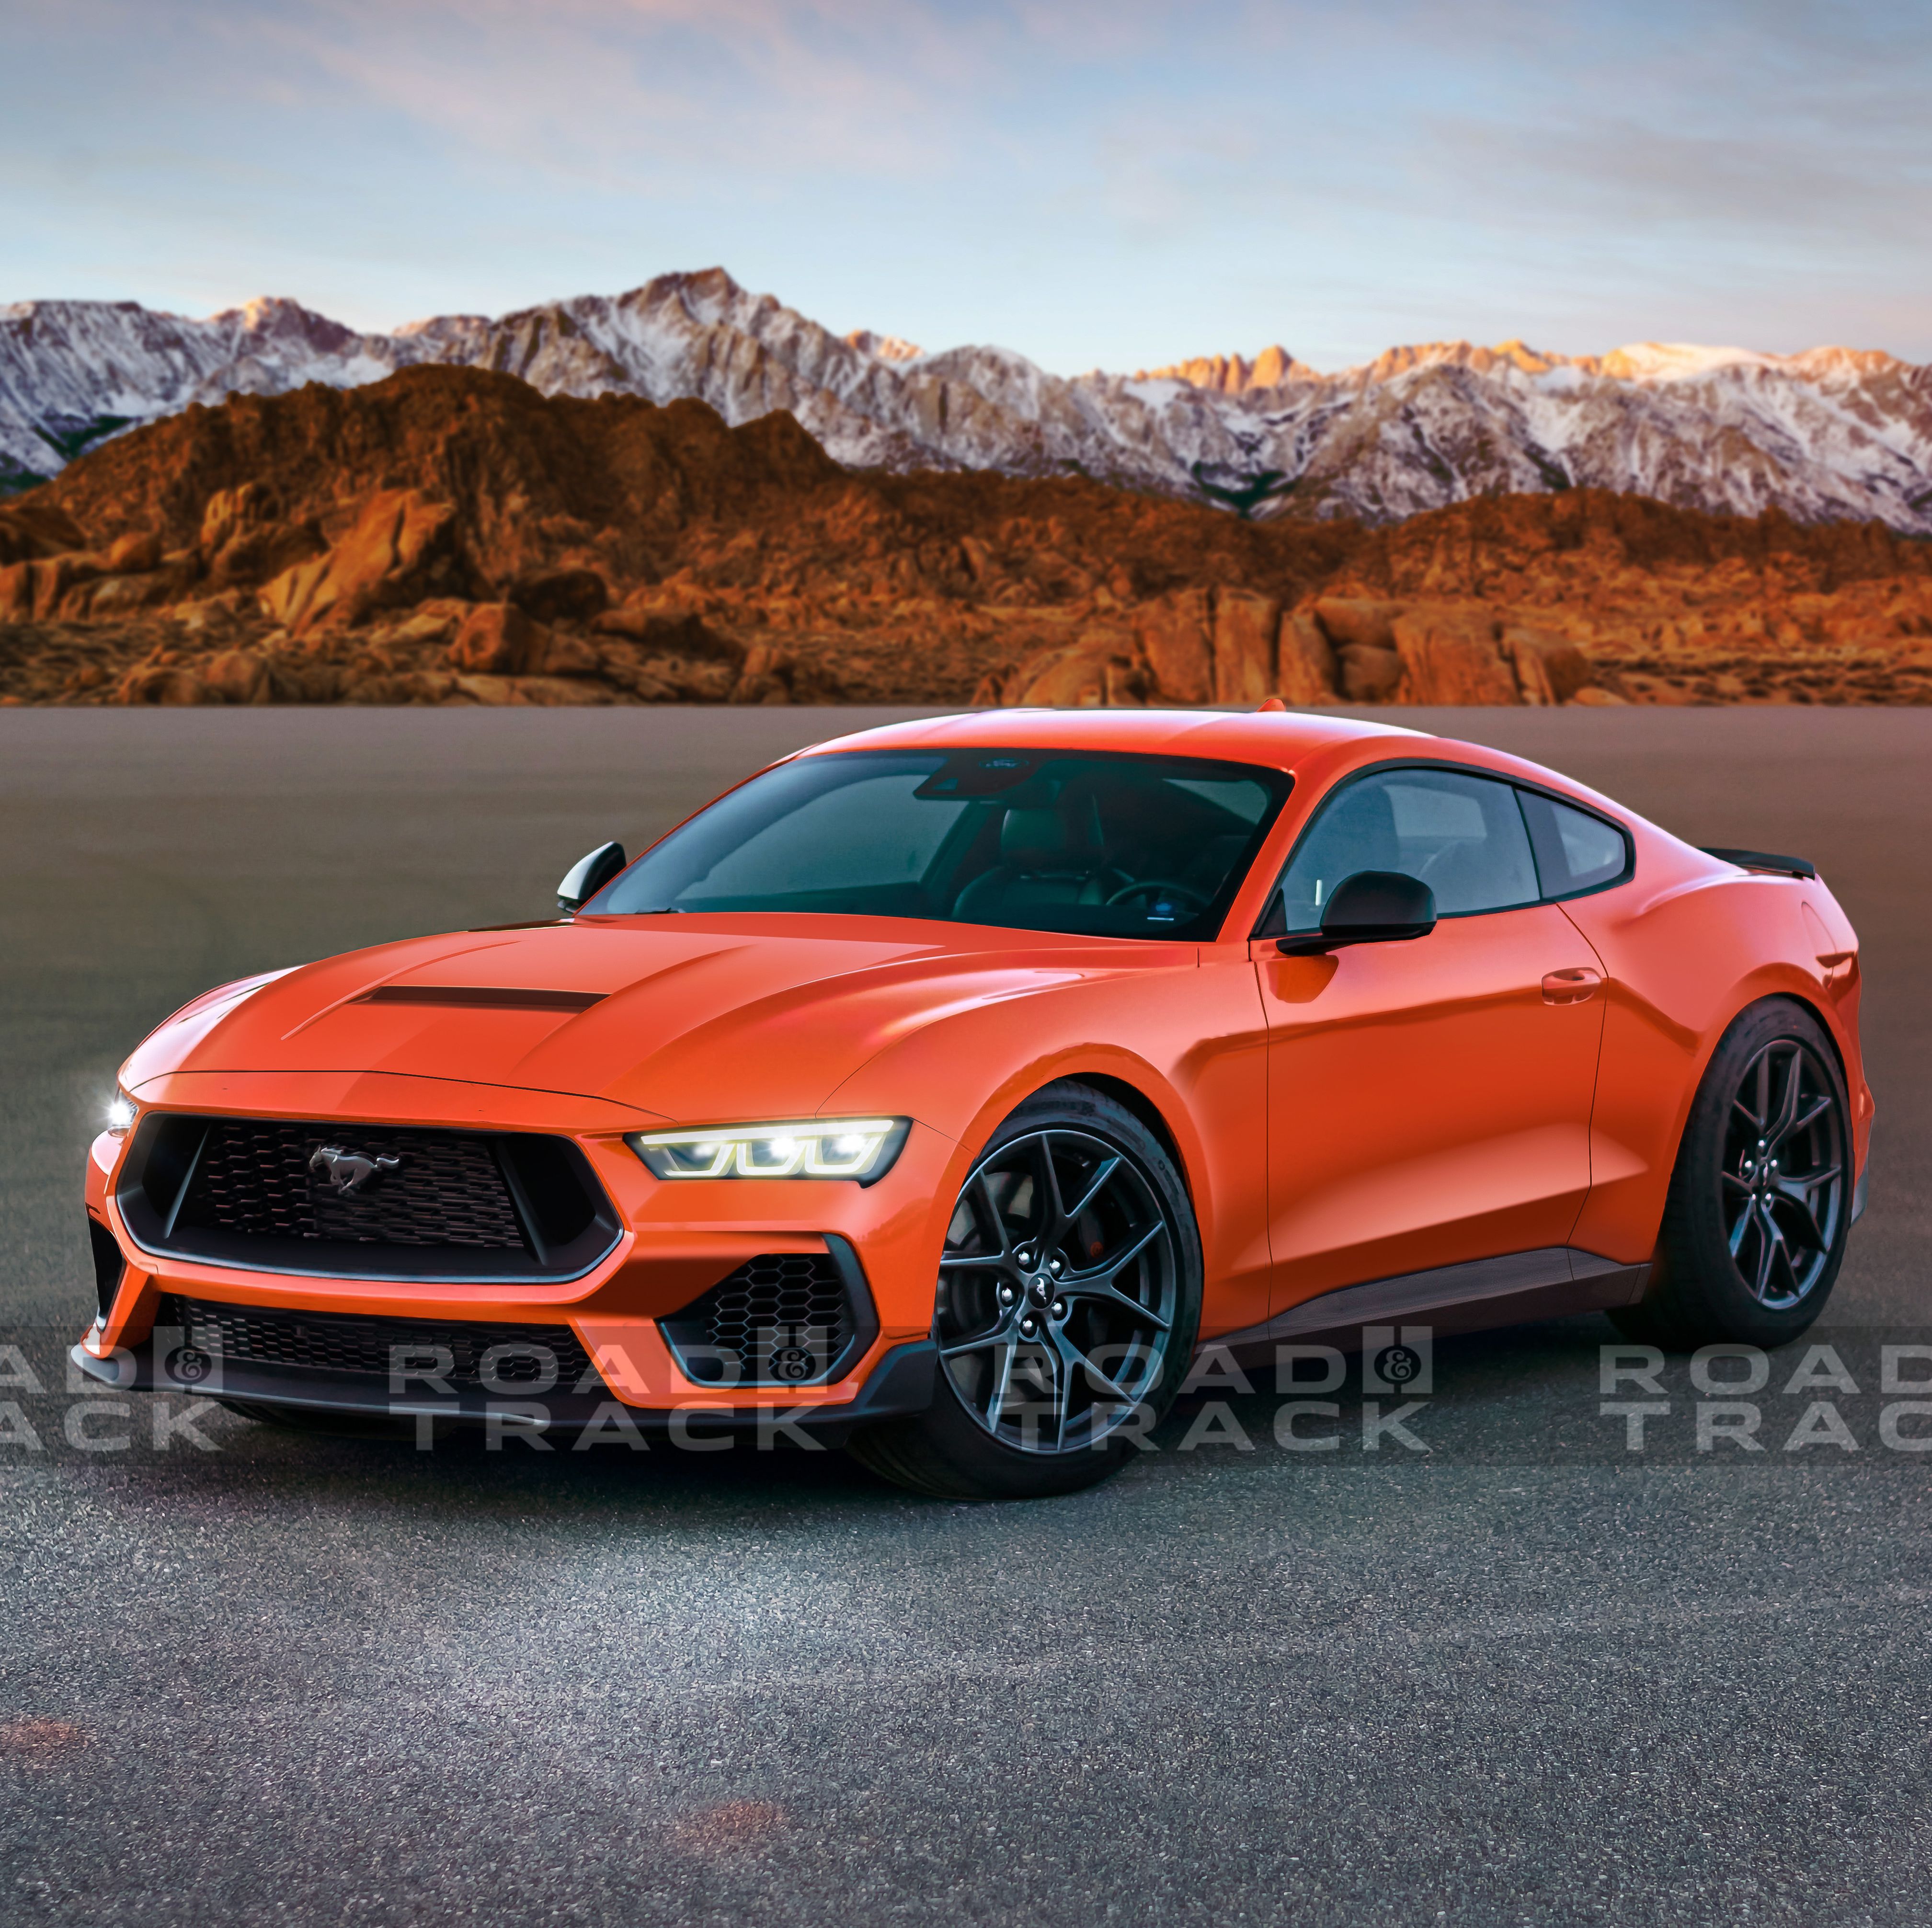 Here's What the Next-Generation Ford Mustang Could Look Like